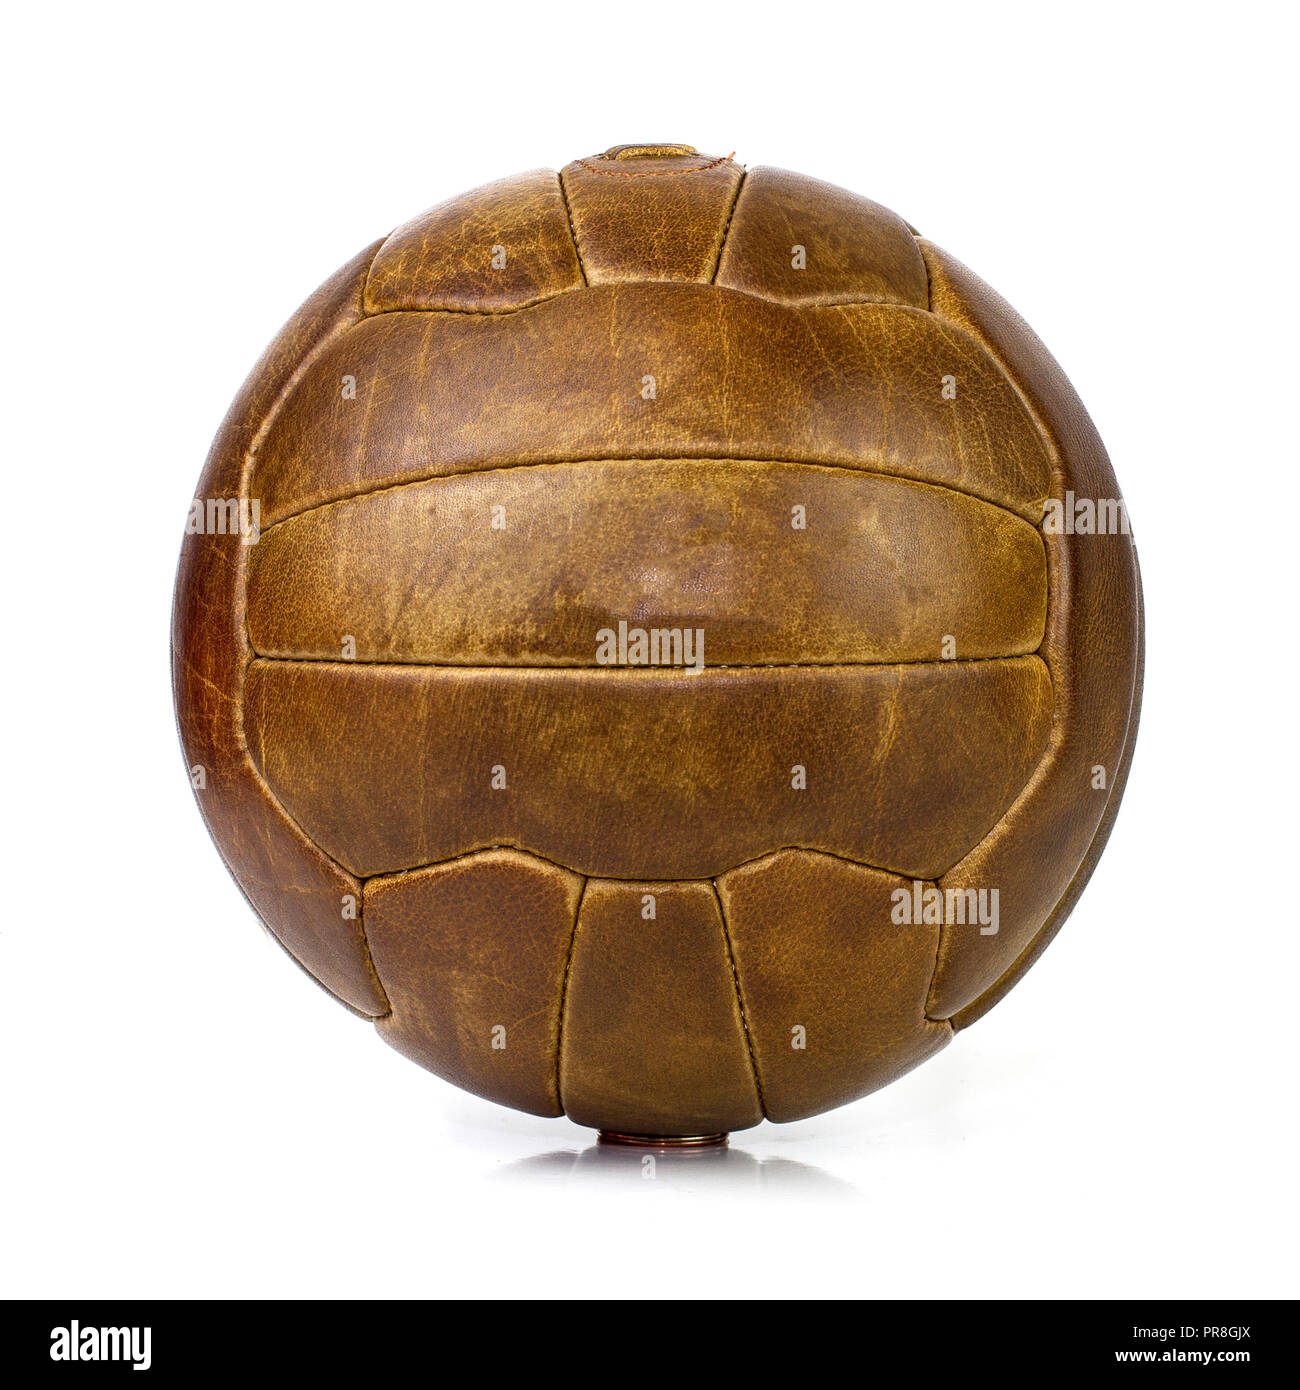 vintage lace up leather football soccer ball on site background Stock Photo